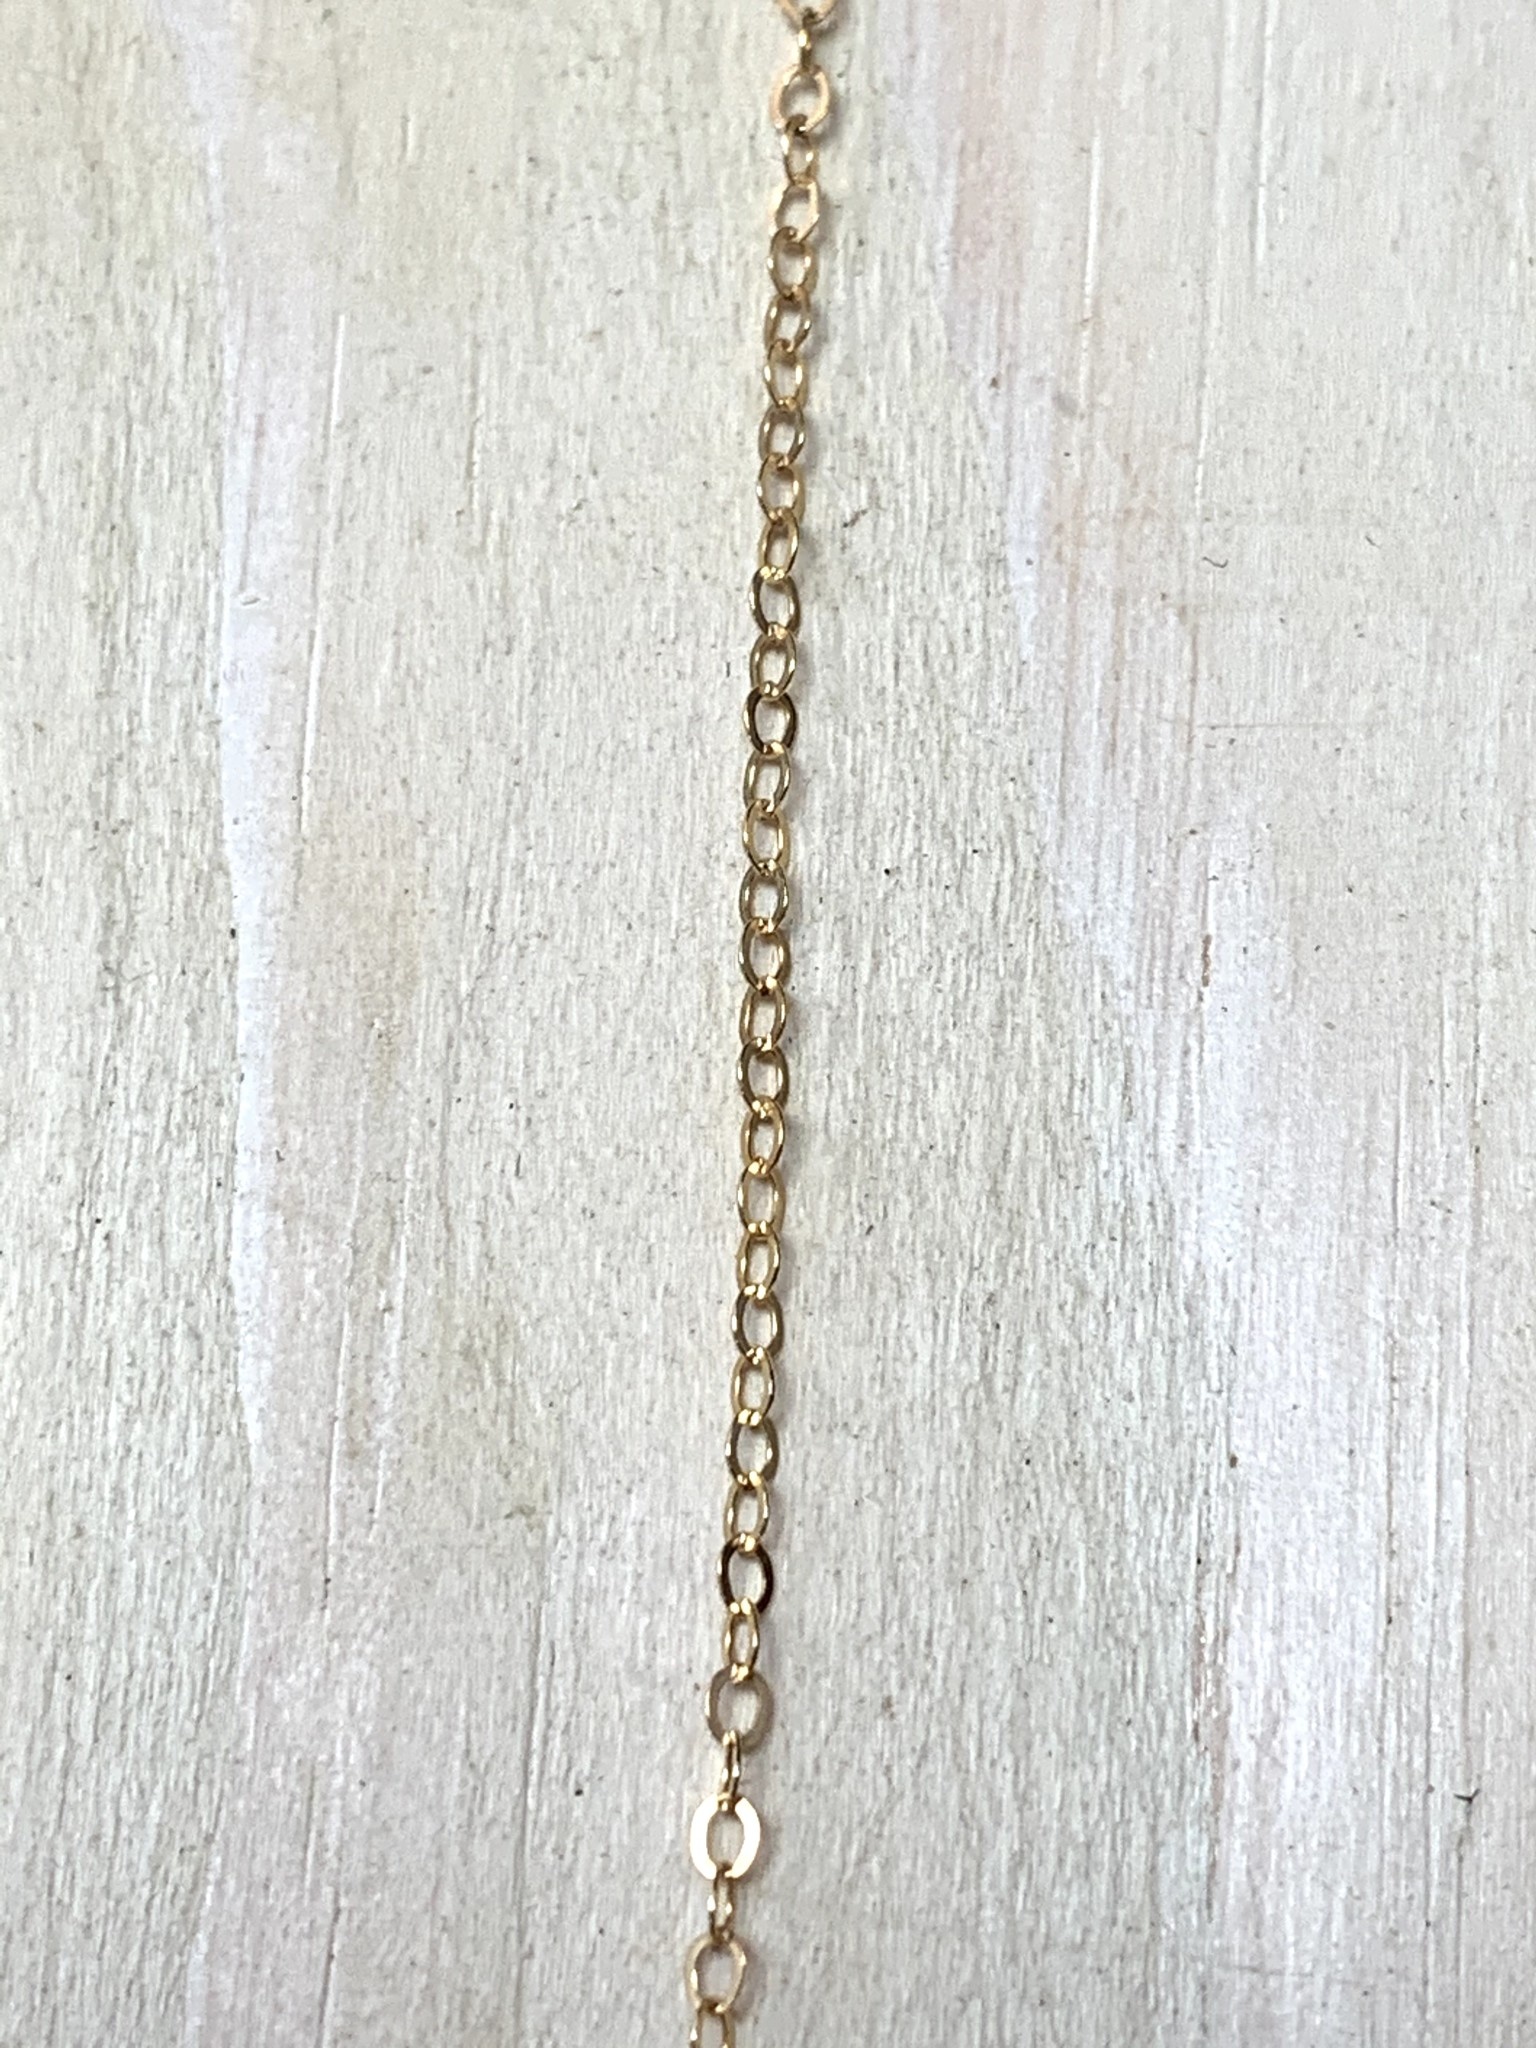 1FT 3mm 14k Gold Filled Chain by Foot, Unfinished Flat Round Link